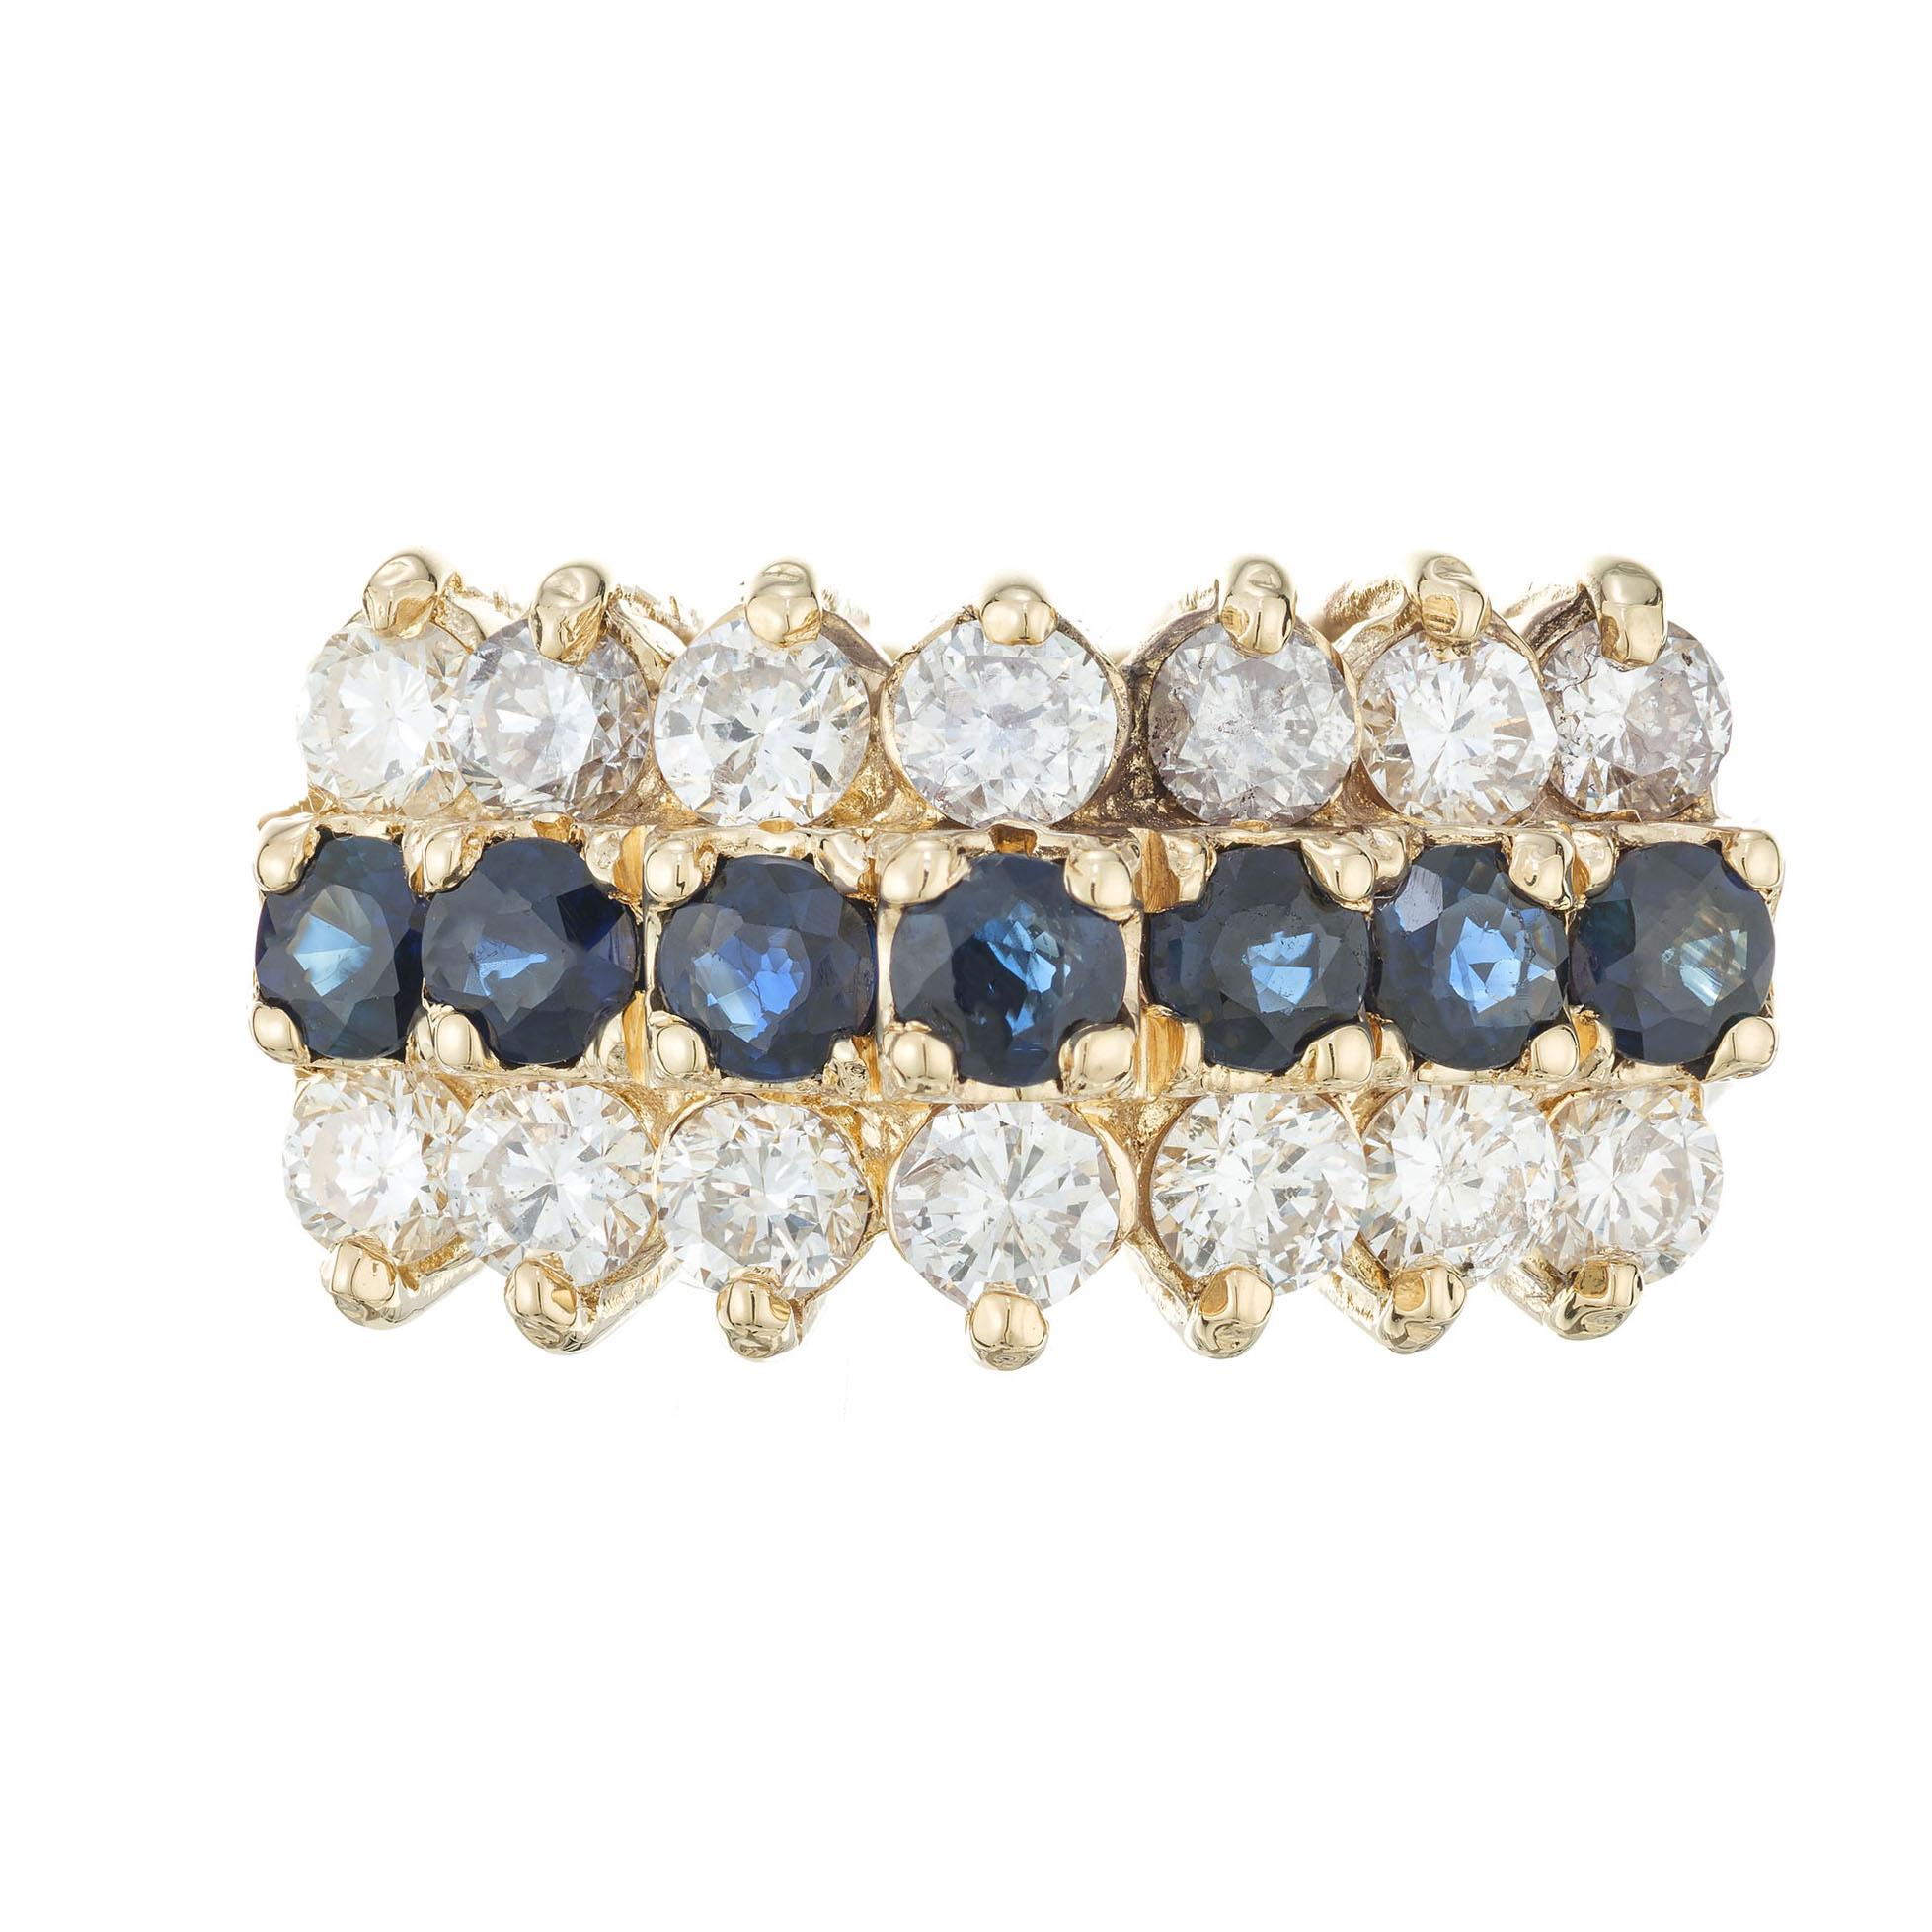 Sapphire and diamond raised crown cluster cocktail ring. Two rows of  white round diamonds along a center row of deep blue sapphires in 14k yellow gold setting. 

14 round diamonds approx. total weight 1.40cts, G, SI1
7 round sapphires approx. total